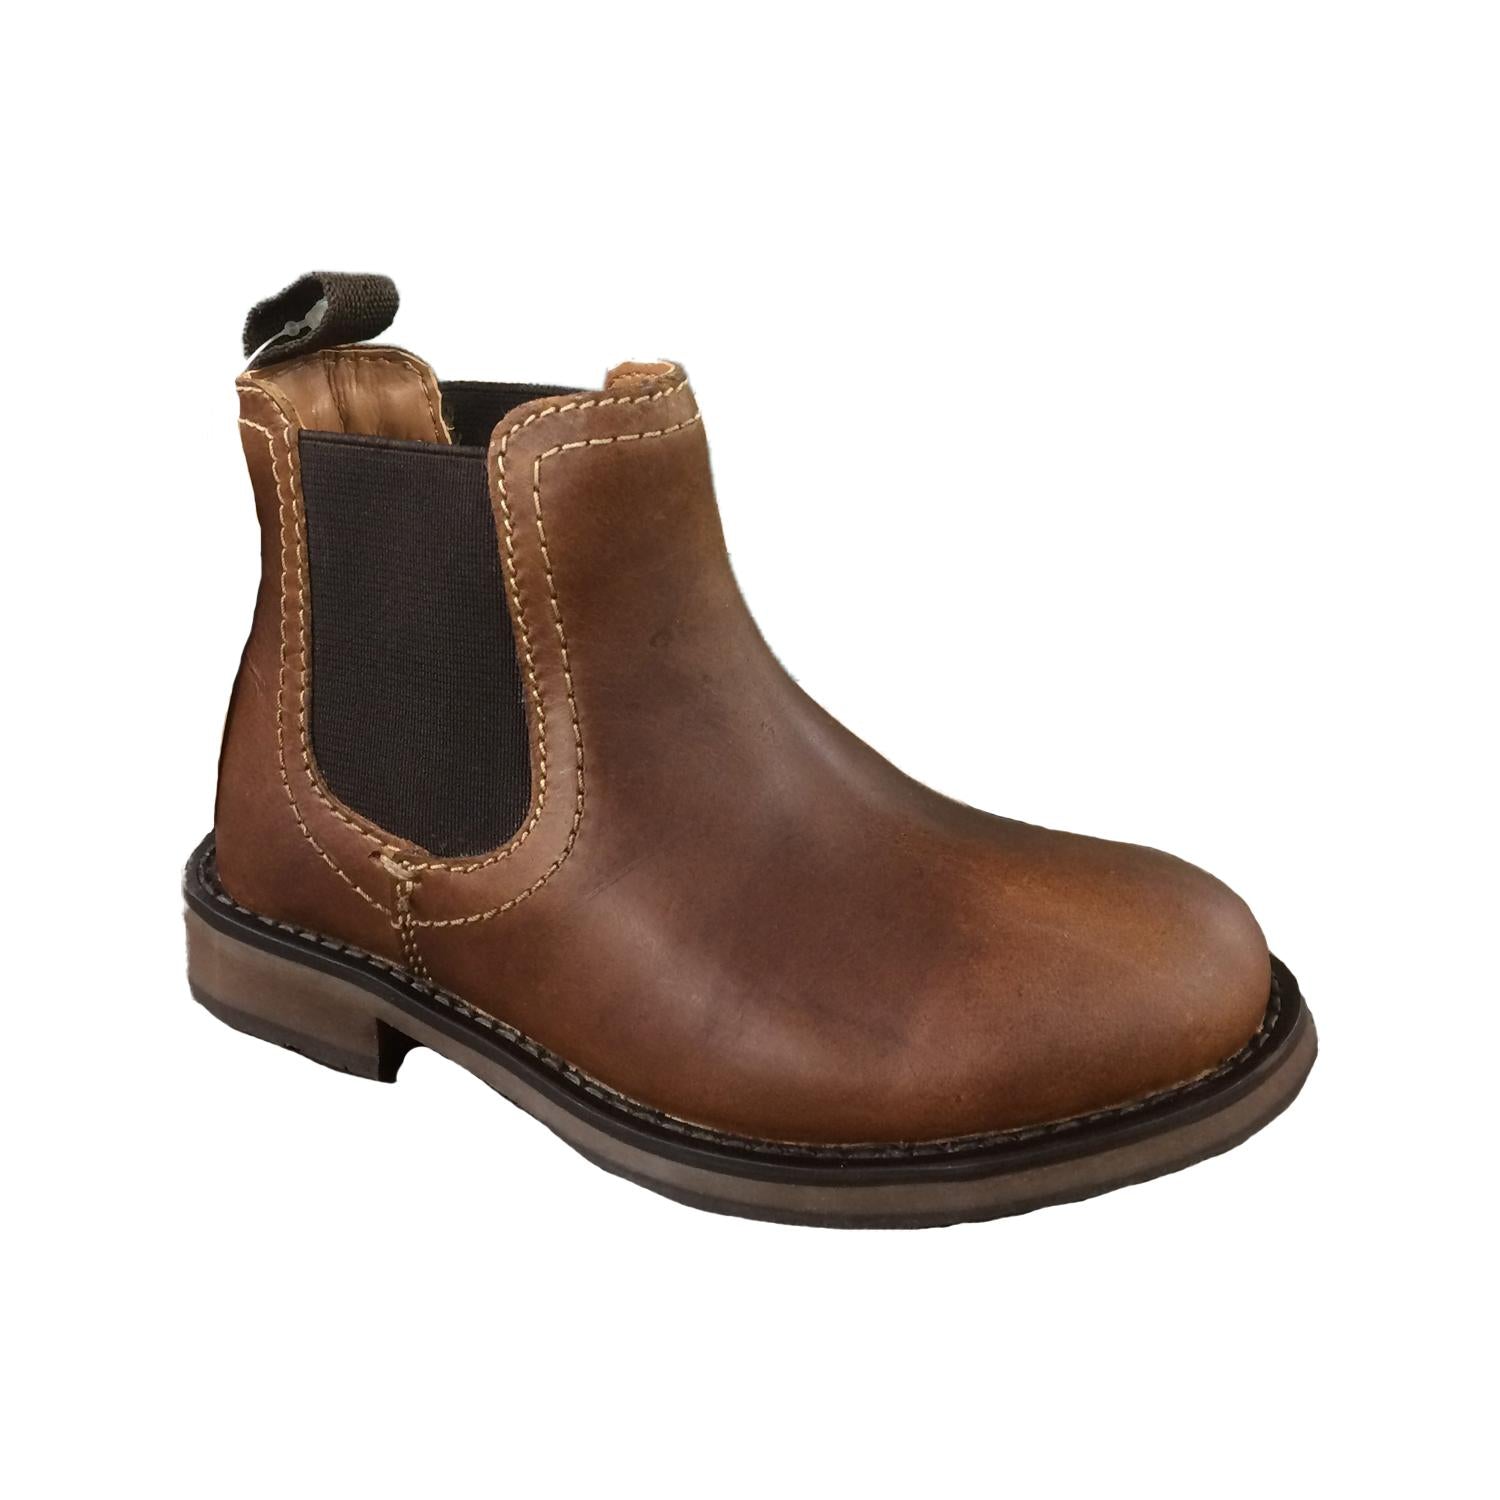 Oaktrak Oakham Rustic Brown Childrens Dealer Boots @ mills country store     These Oakham Dealer boots are a durable yet fashionable pair that are fit for all occasions - smart or casual. With a treaded sole and textile lining these boots are a comfortable fit. Easy pull on and off with Comfortable hardwearing sole. Available in Junior sizes Infant & Boys/Girls